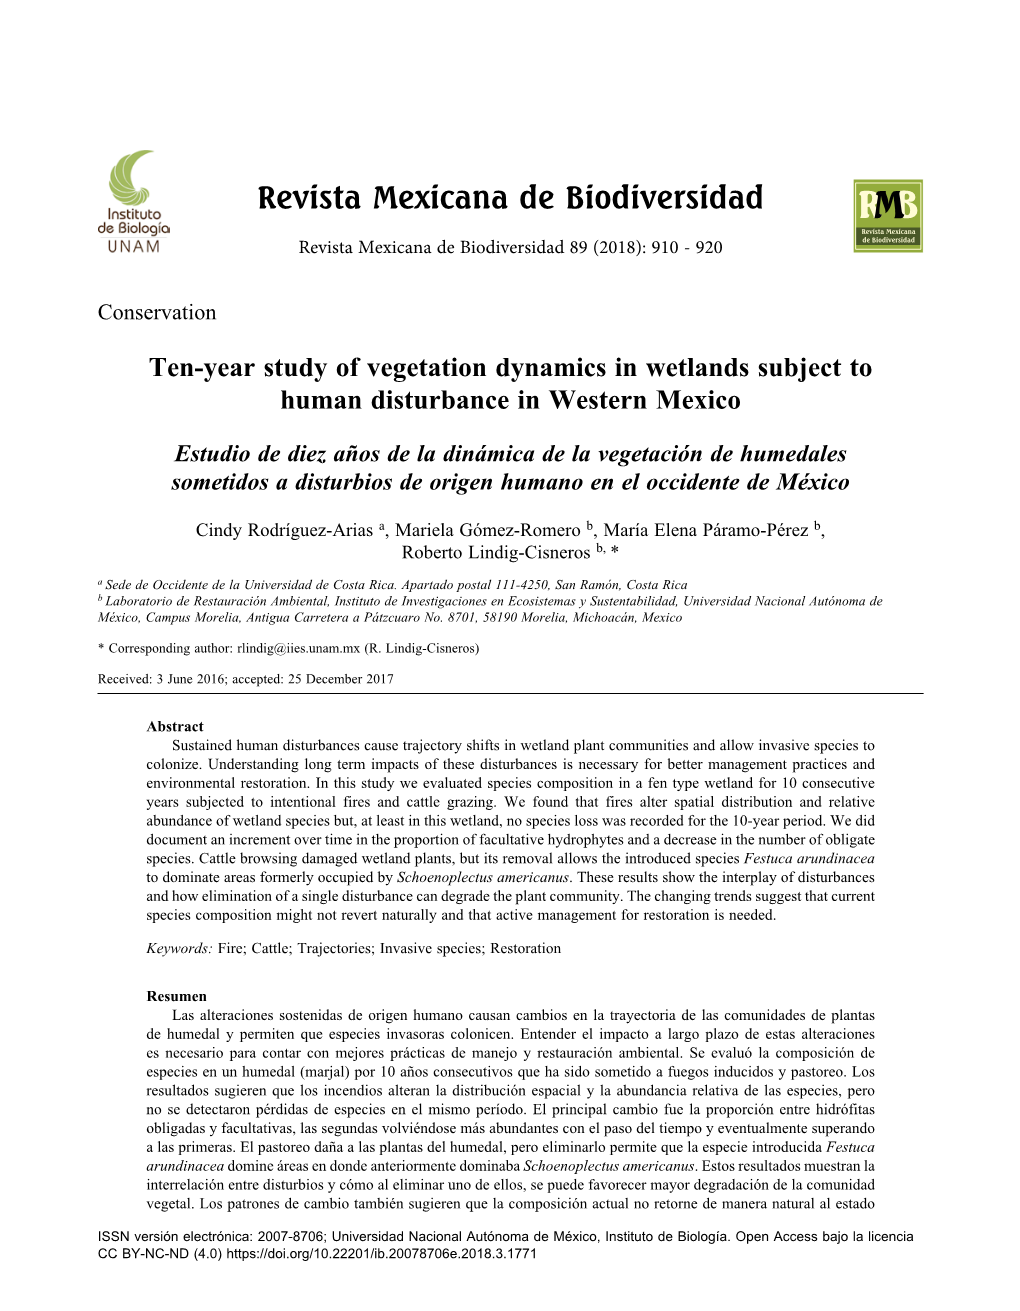 Ten-Year Study of Vegetation Dynamics in Wetlands Subject to Human Disturbance in Western Mexico